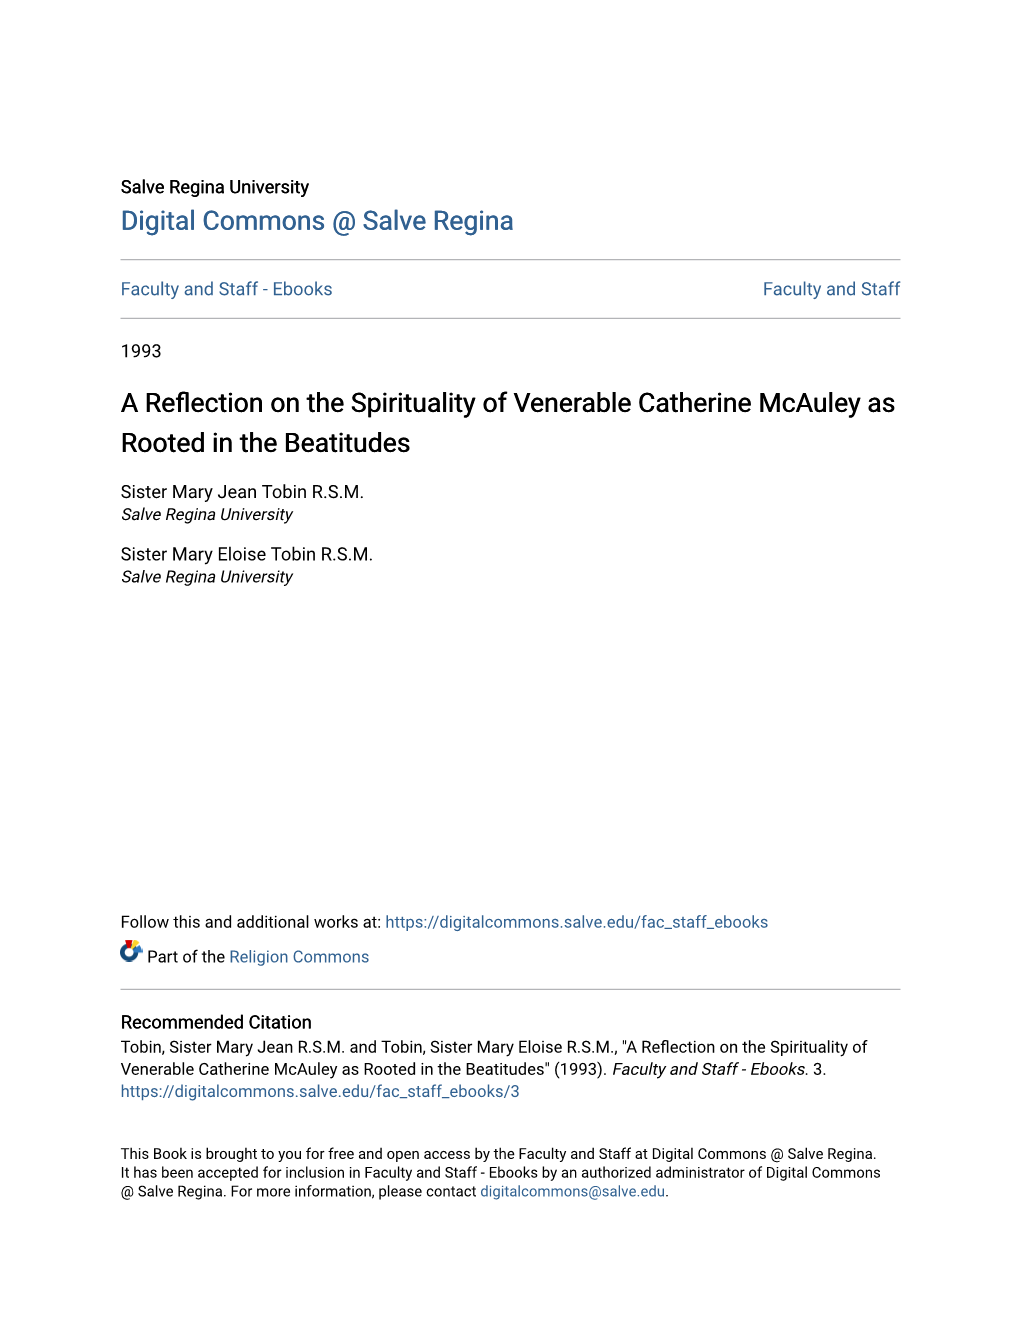 A Reflection on the Spirituality of Venerable Catherine Mcauley As Rooted in the Beatitudes" (1993)